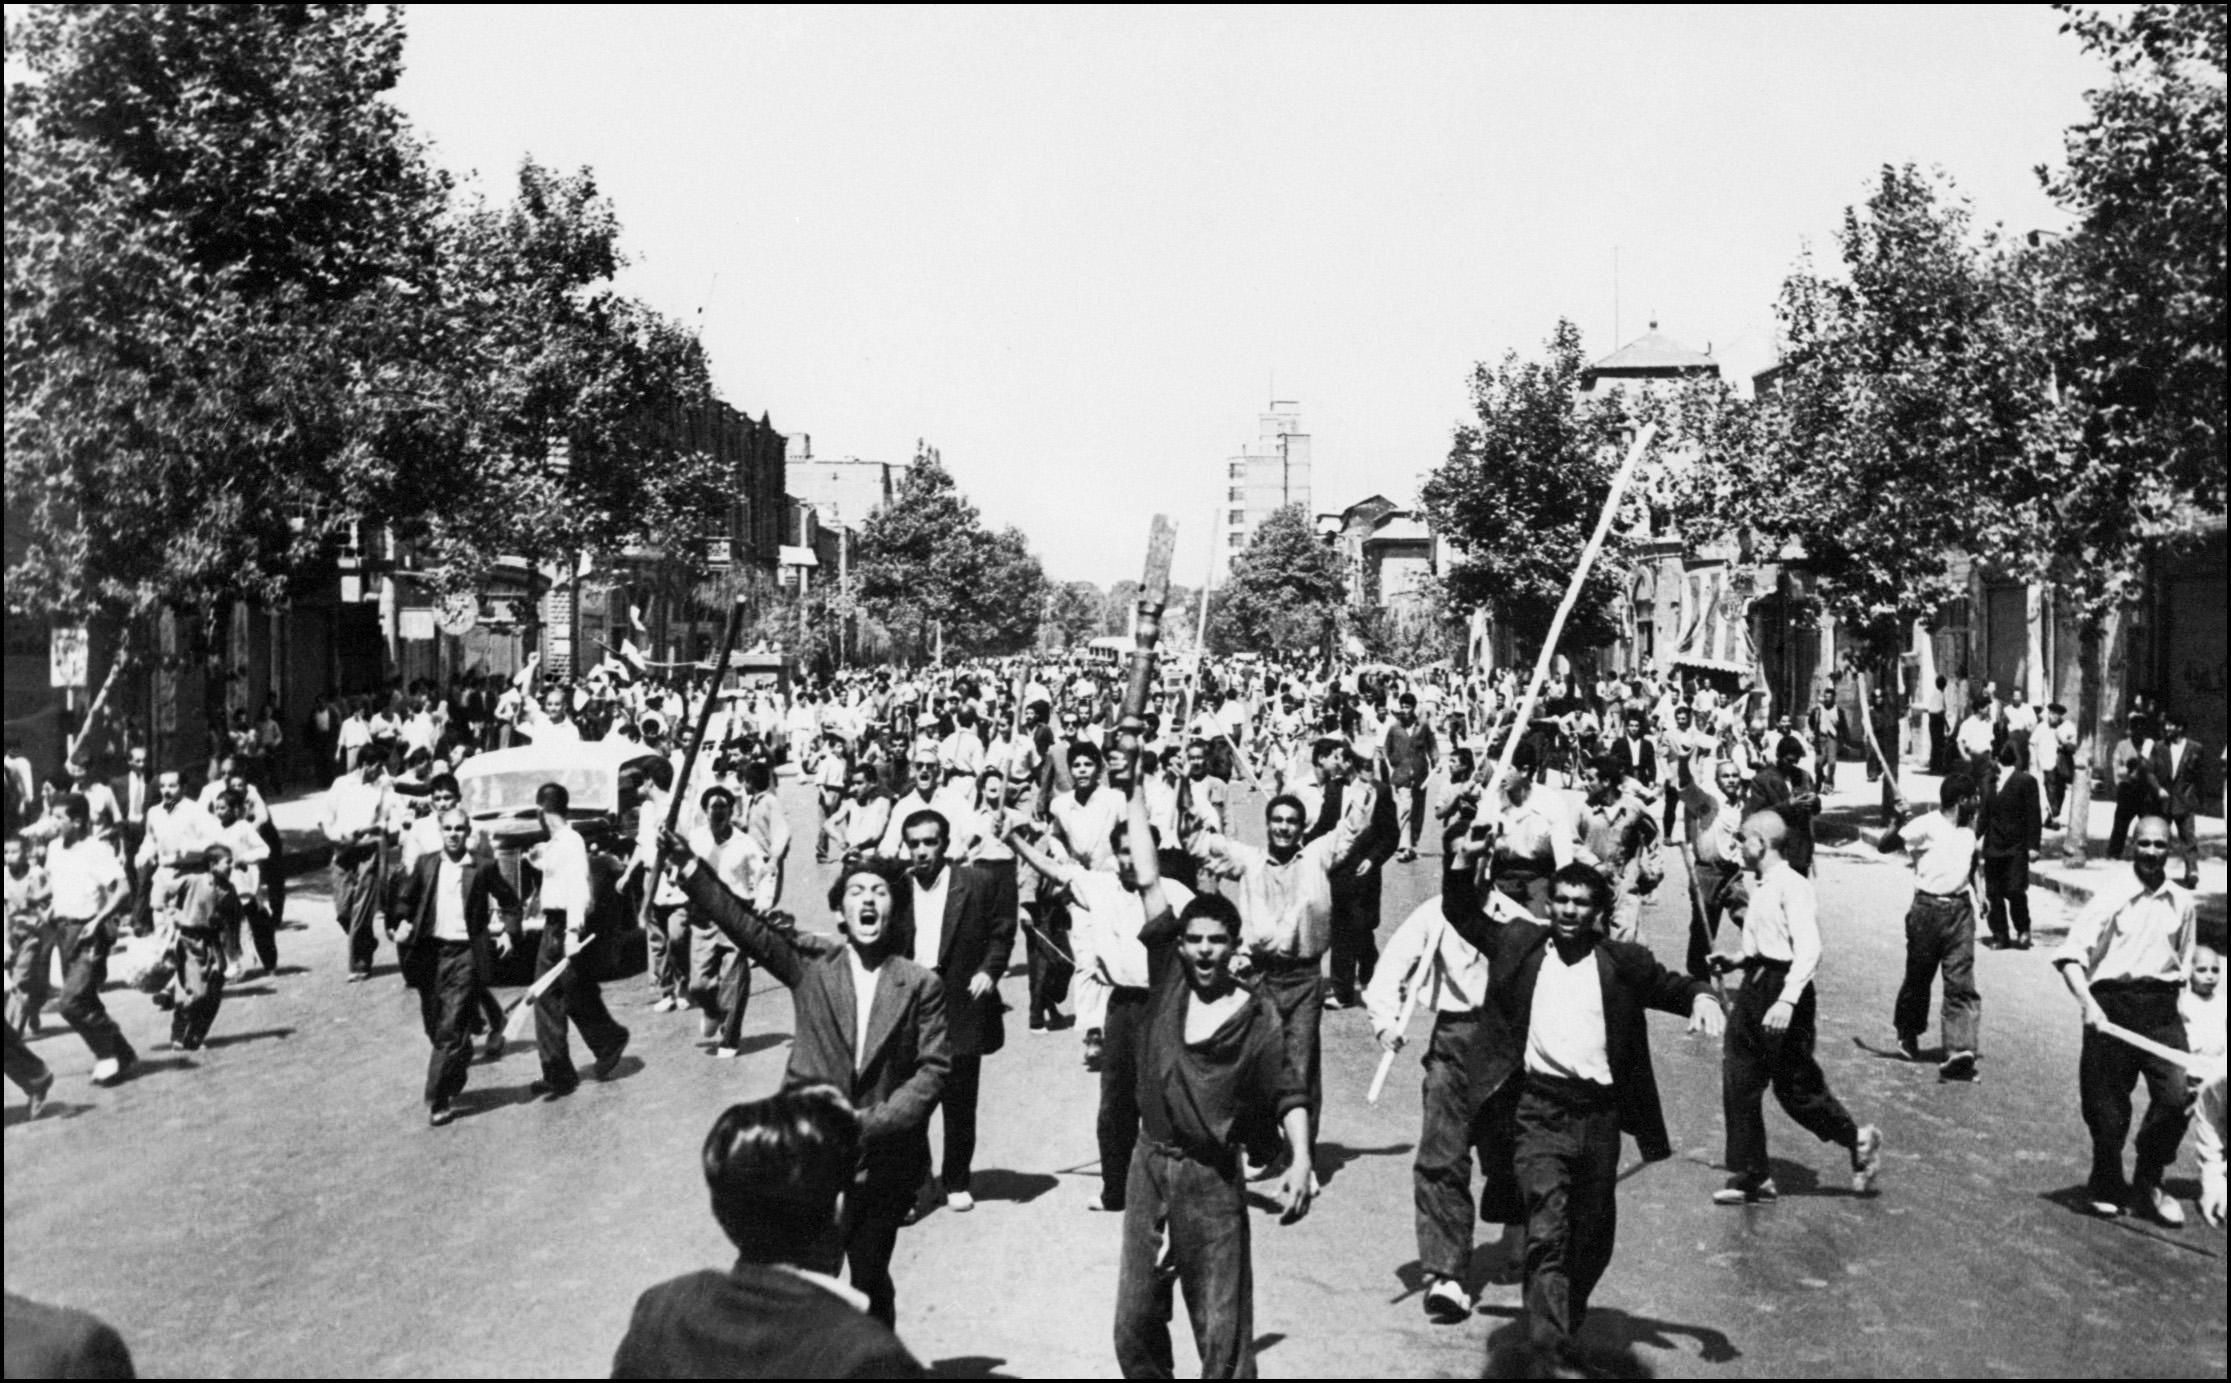 On August 19, 1953, democratically-elected Iranian Prime Minister Mohammad Mossadegh was overthrown in a coup orchestrated by the CIA and British intelligence, after having nationalized the oil industry. The Shah Mohammad Reza Pahlavi was re-installed in the primary position of power. Massive protests broke out across the nation, leaving almost 300 dead in firefights in the streets of Tehran. (Photo by - / INTERCONTINENTALE / AFP) (Photo: /AFP/Getty Images)